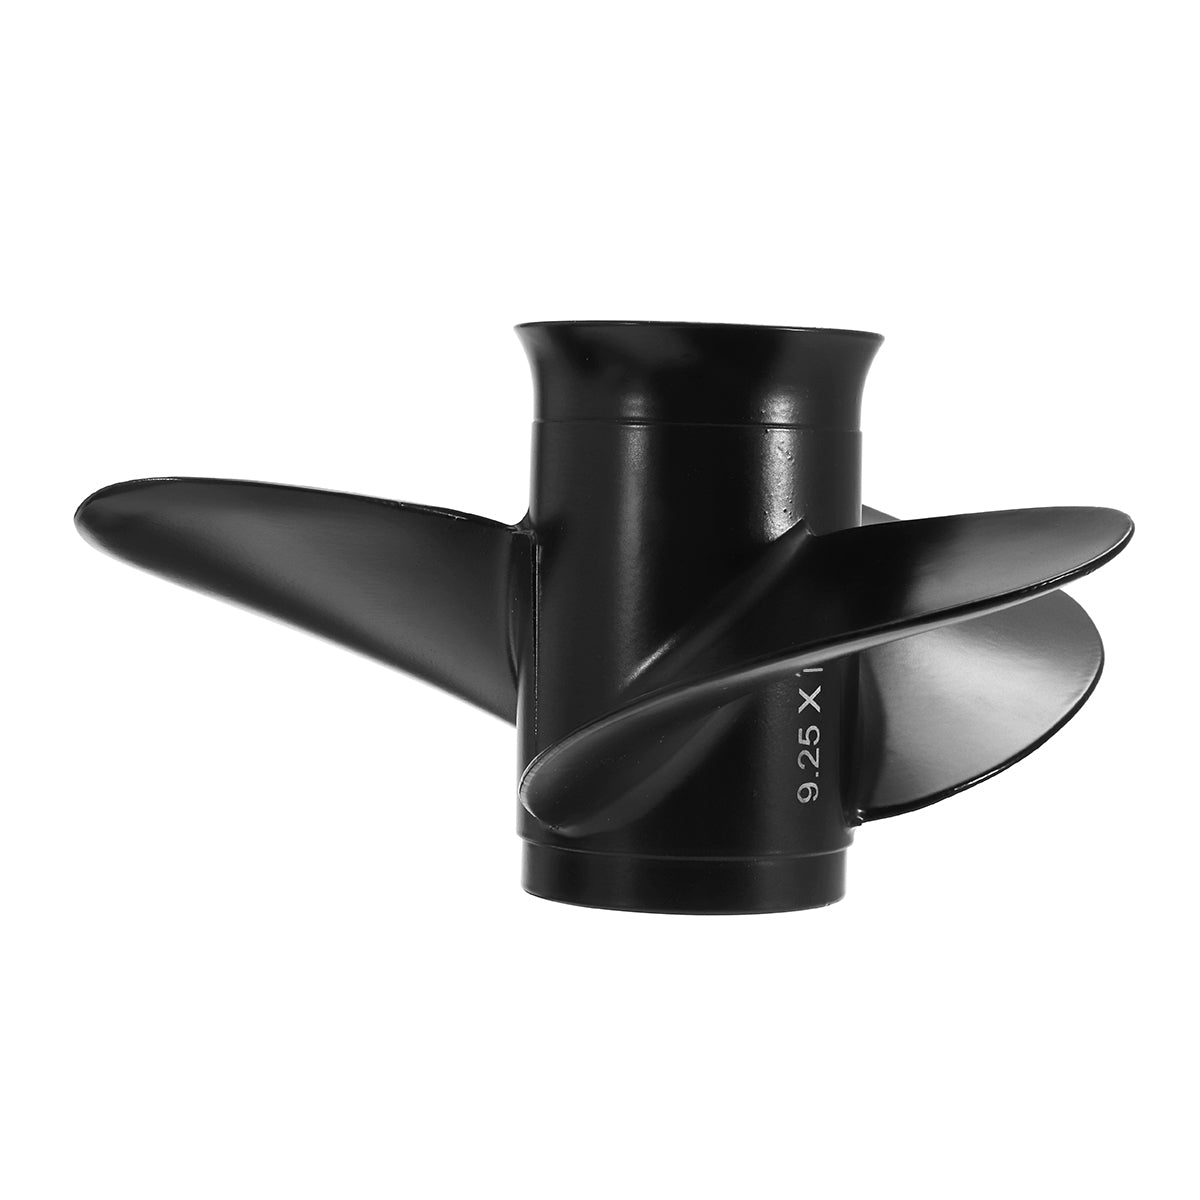 Black 9.25 x 11 Outboard Propeller For Mercury Tohatsu Nissan 9.9-20HP 48-897754A11